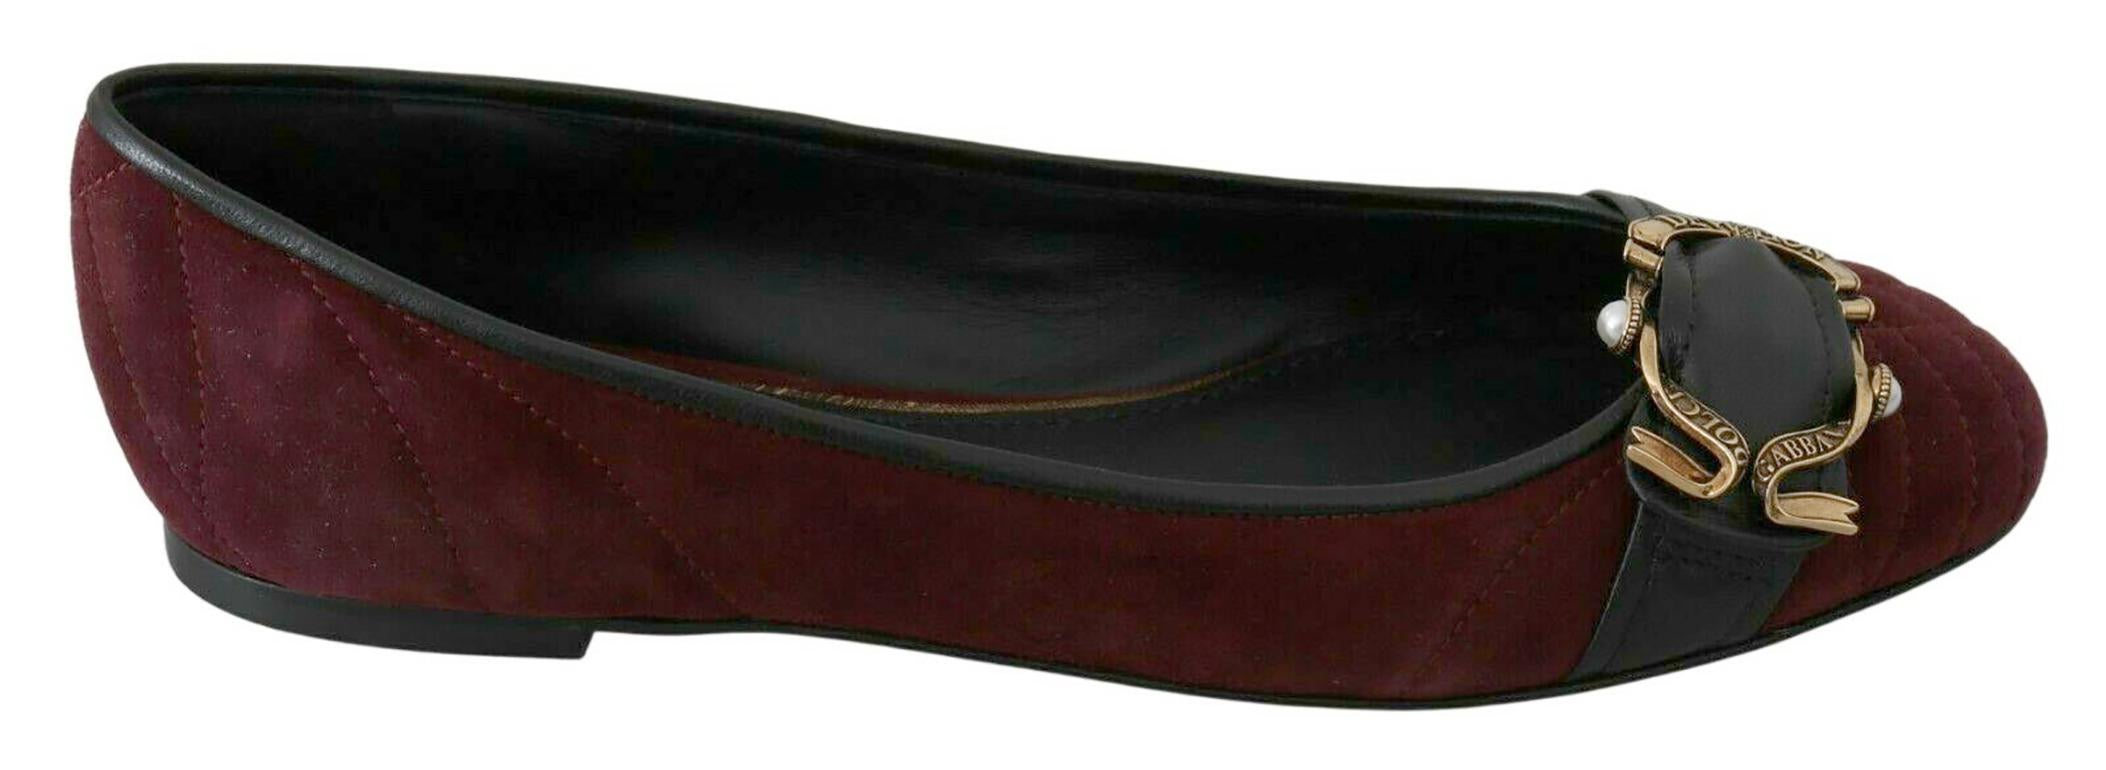 Gorgeous brand new with tags, 100% Authentic Dolce & Gabbana Shoes.




Model: Ballerina flats

Color: Bordeaux 

Material: Suede

Sole: Leather
Logo details
Made in Italy




Size: EU39 / UK6.5 / US8.5




Dolce & Gabbana box, tags